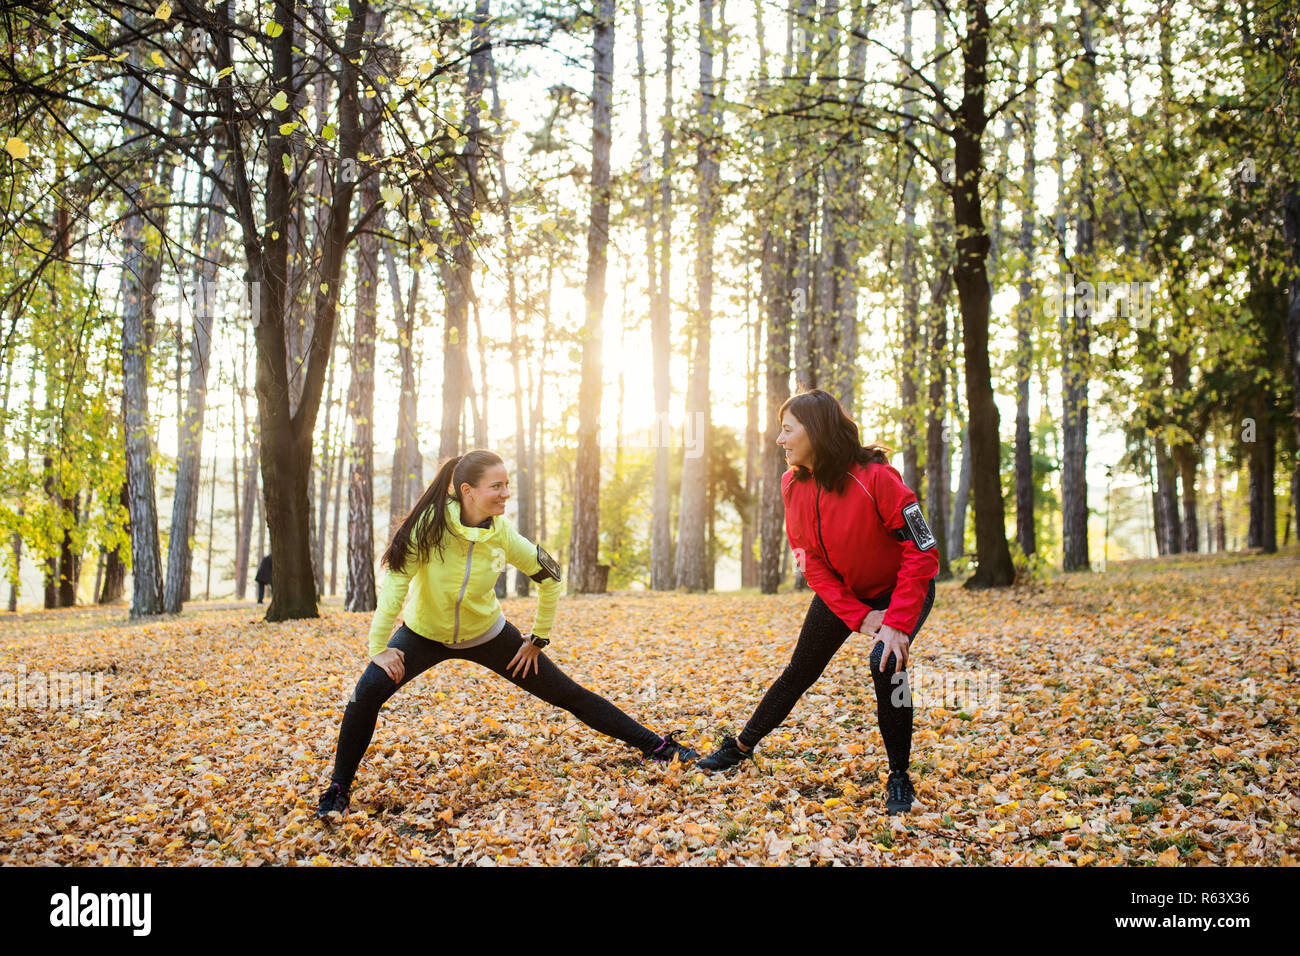 Two female runners stretching outdoors in forest in autumn nature. Stock Photo